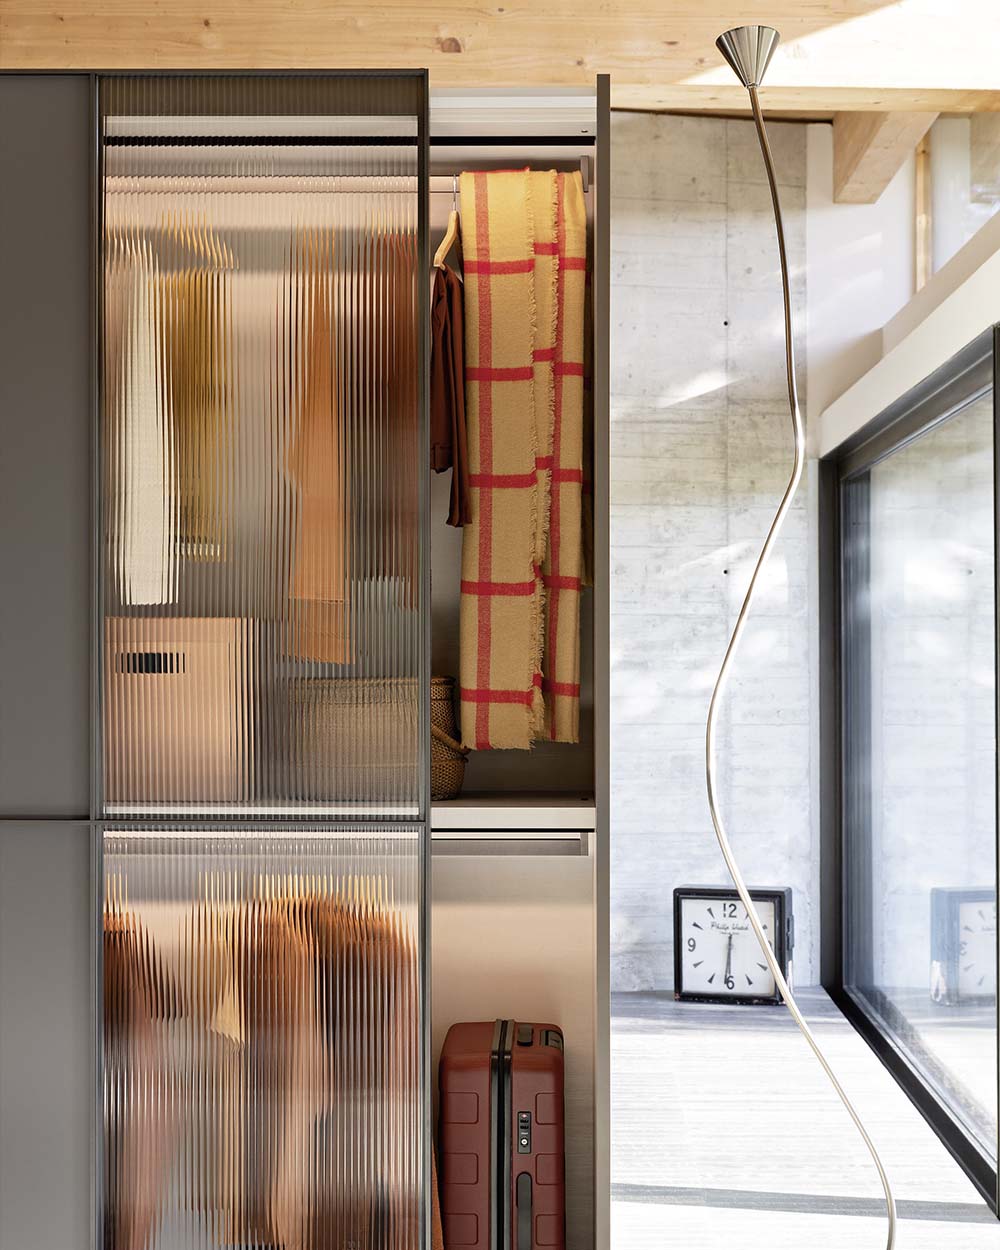 Modern, Italian sliding wardrobe with elegant glass panels, available with wired glass and smoked glass with matt lacquer. Designed and fitted by Krieder.